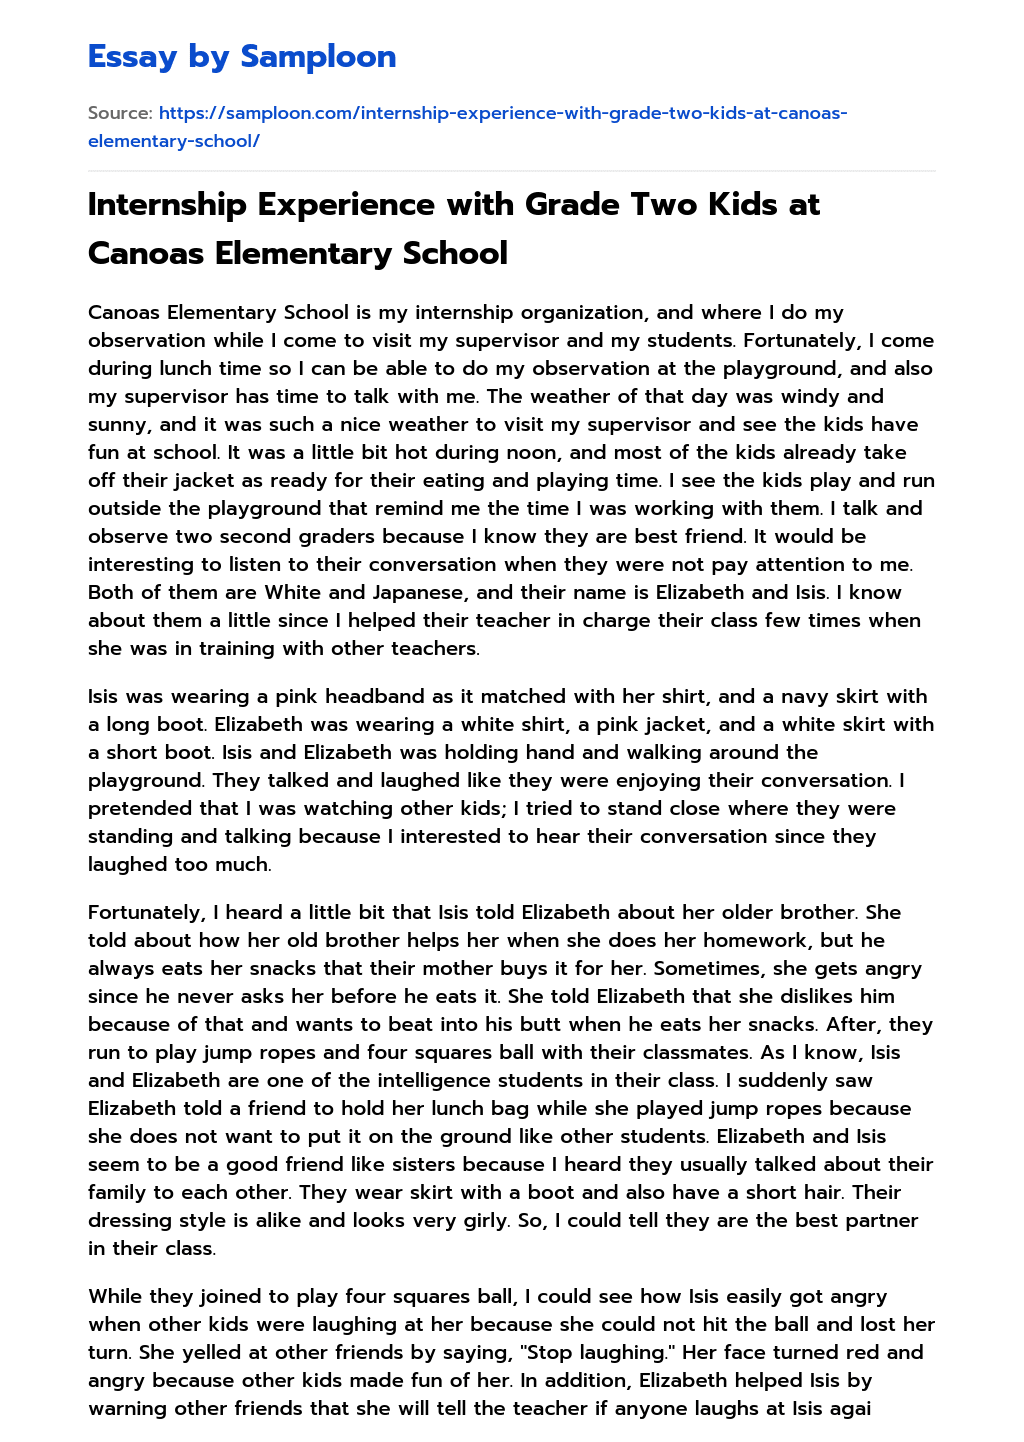 Internship Experience with Grade Two Kids at Canoas Elementary School essay